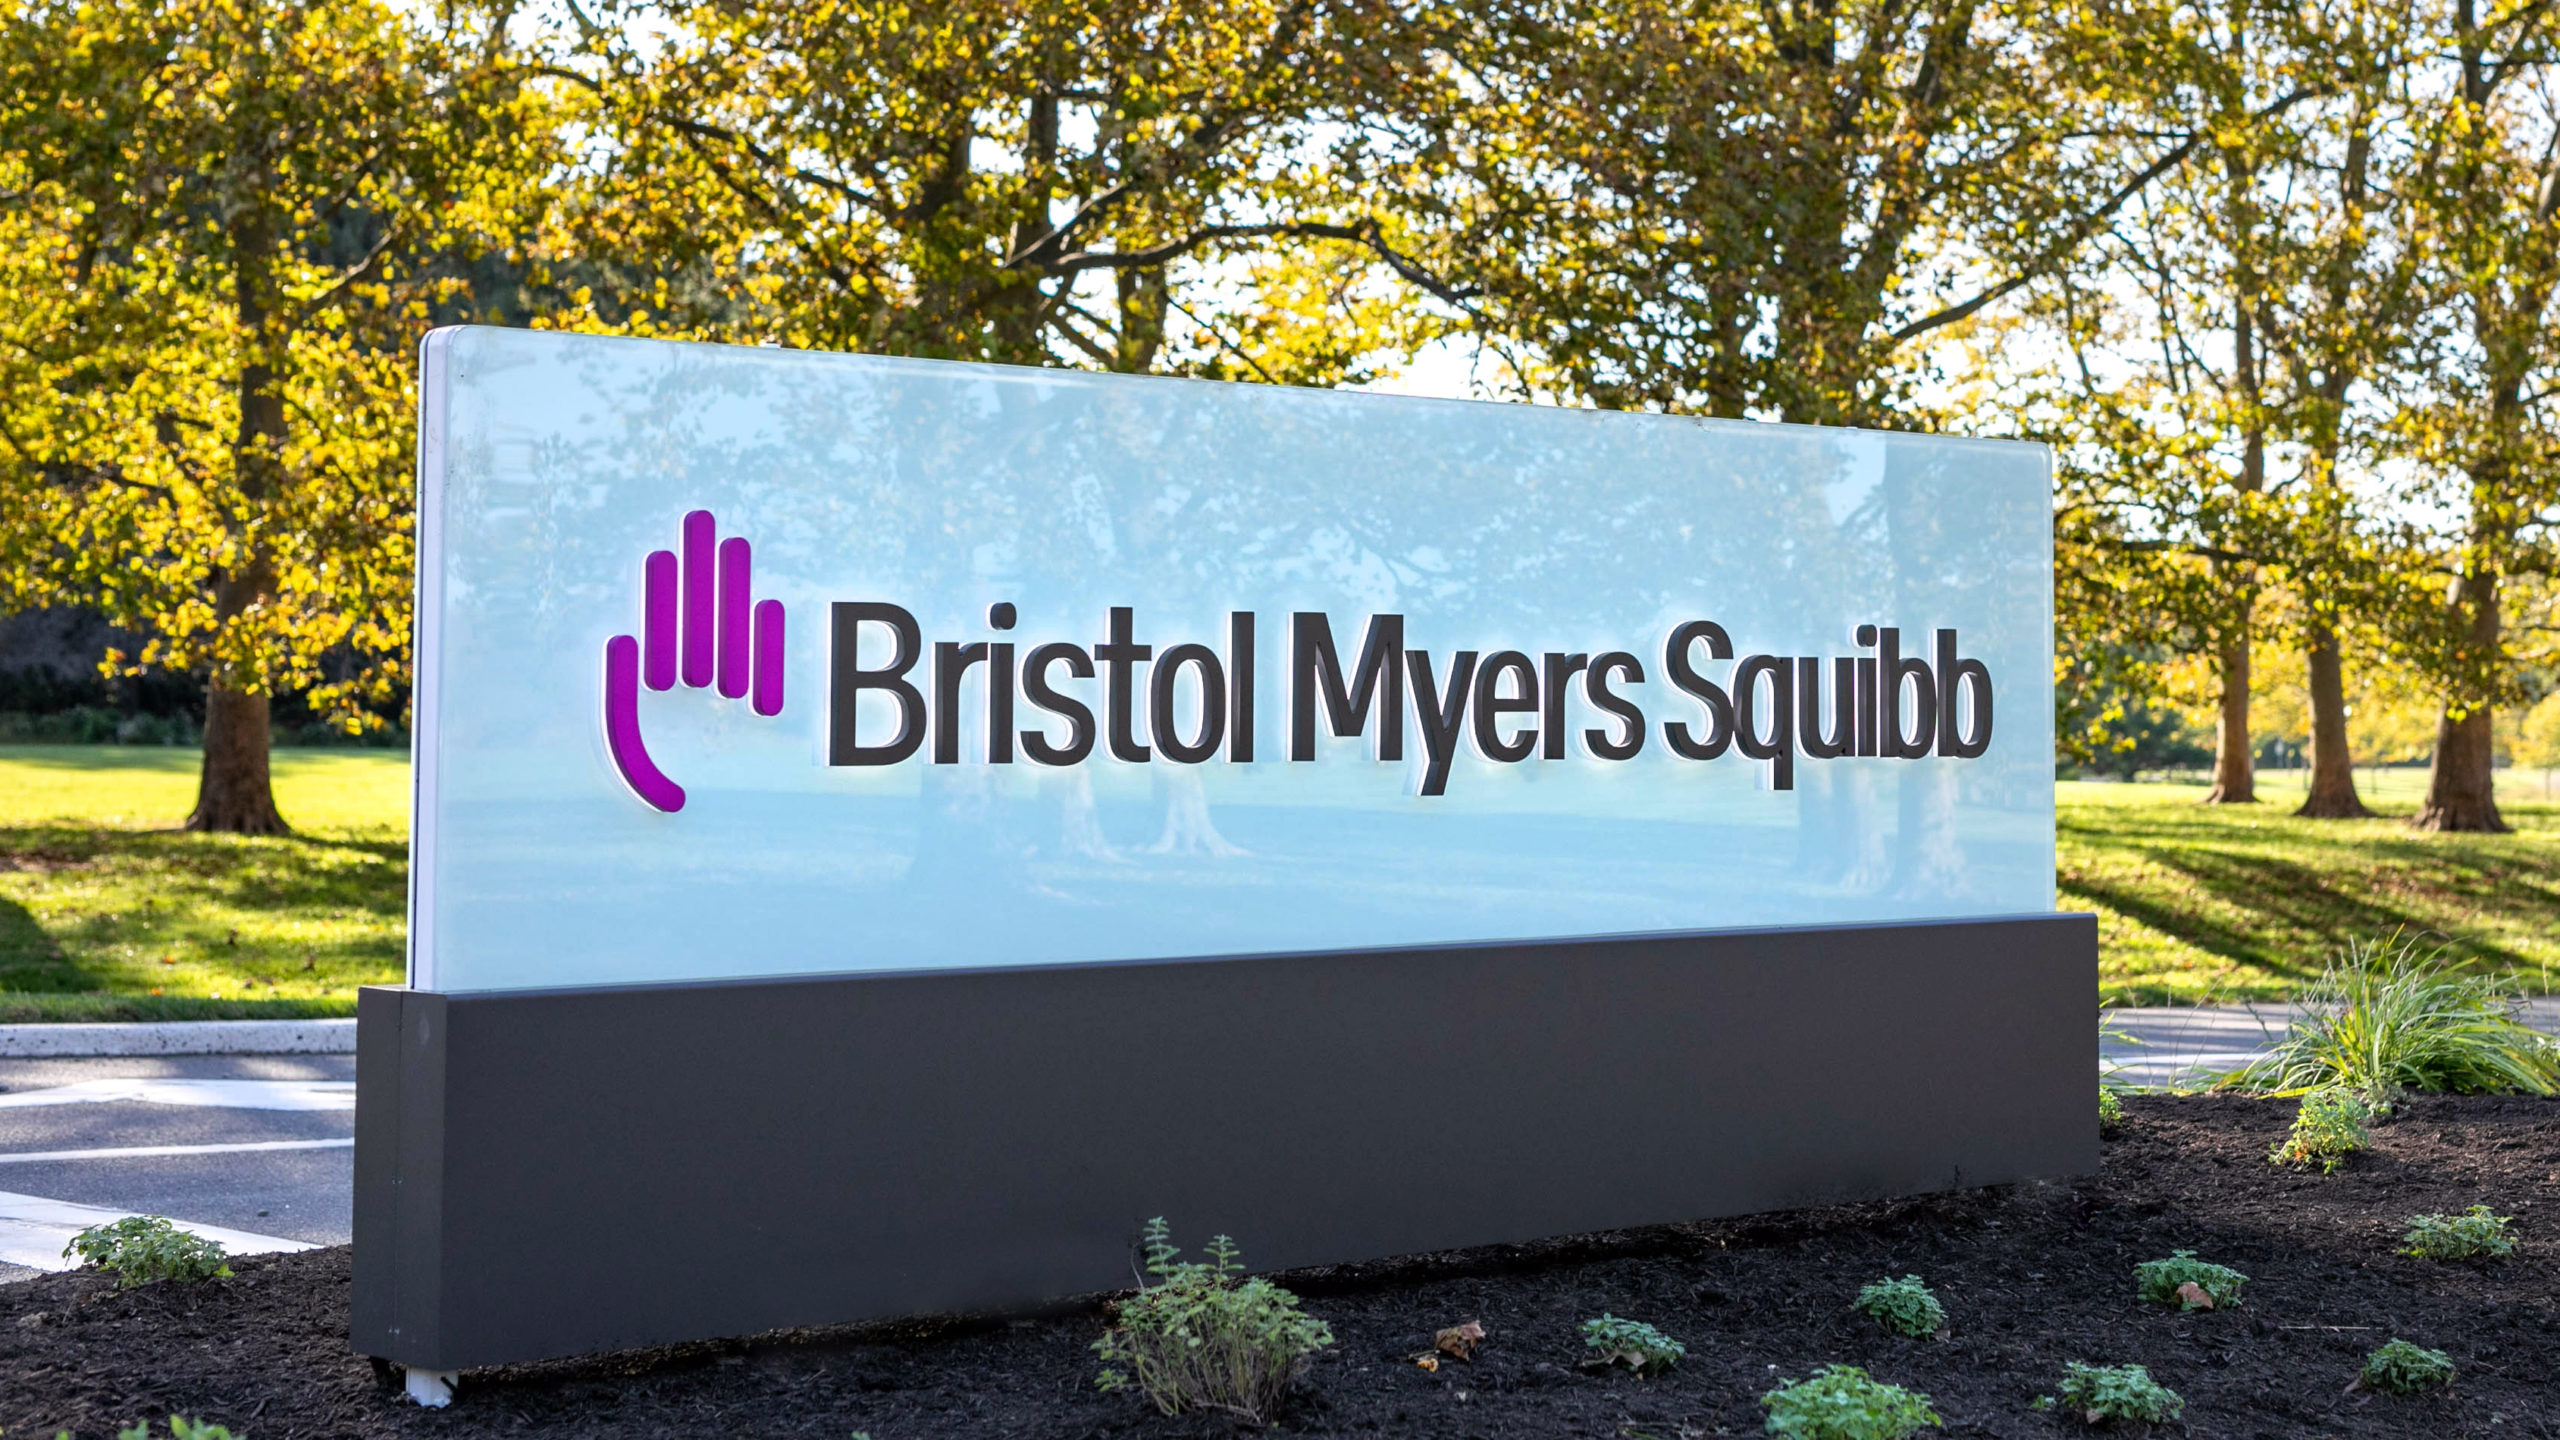 Bristol Myers Squibb in collaboration with Disability Solutions is launching the Disability Diversity in Clinical Trials initiative.